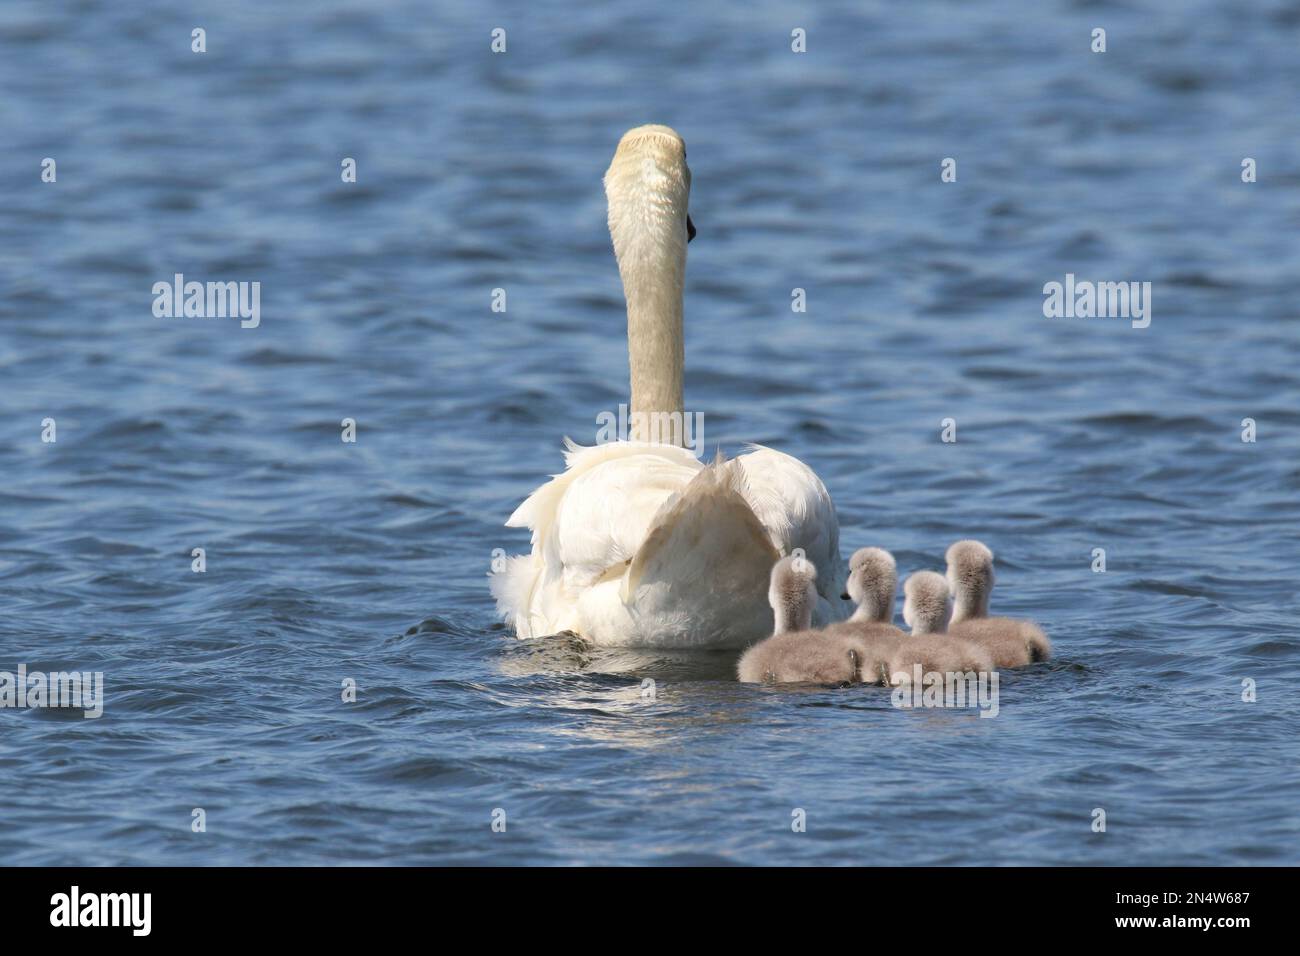 Mother mute swan Cygnus olor swimming on a lake with four cygnets following in Spring in rear view Stock Photo